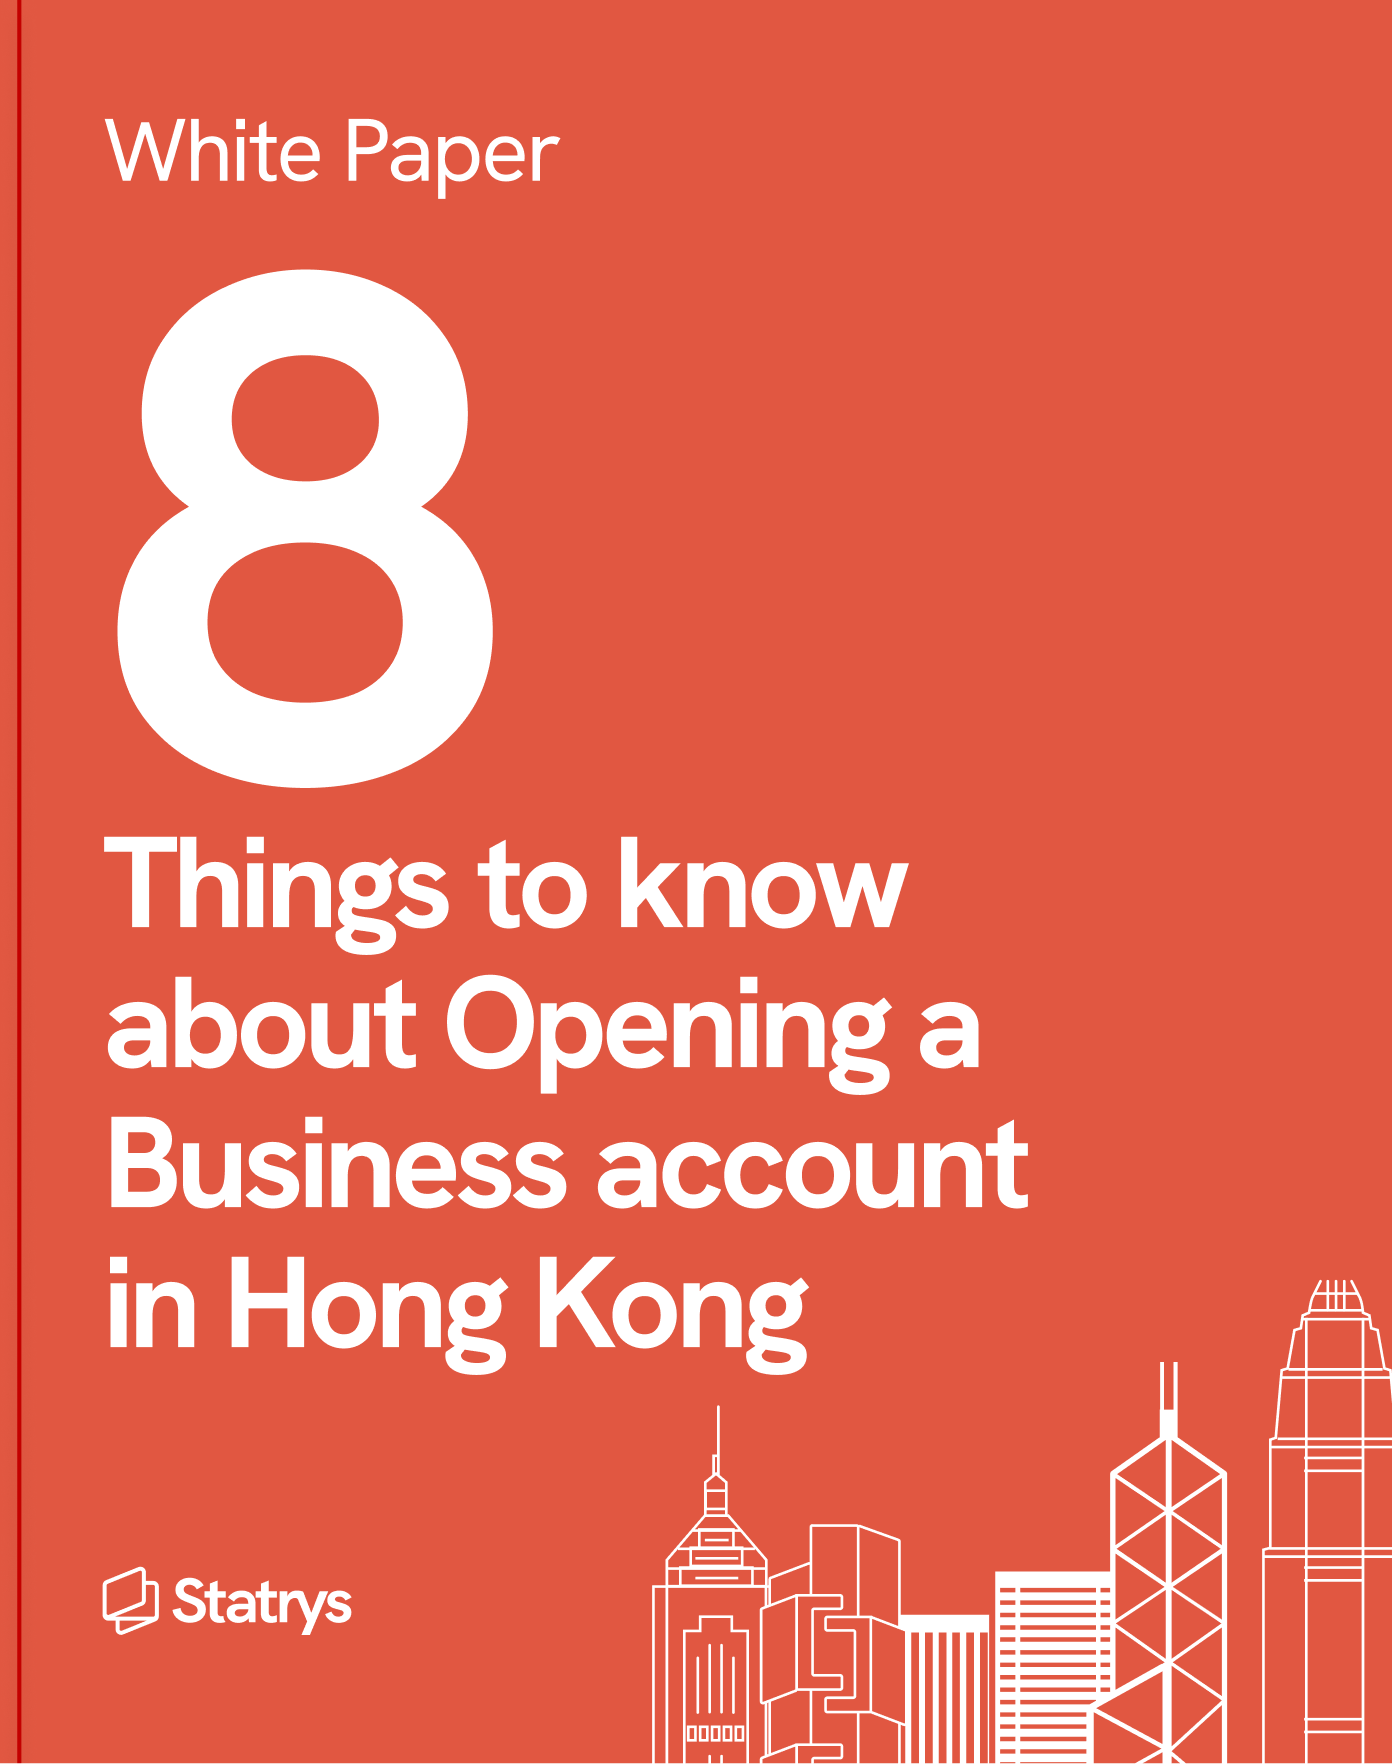 Whitepaper things to know about opening a business bank account in hong kong